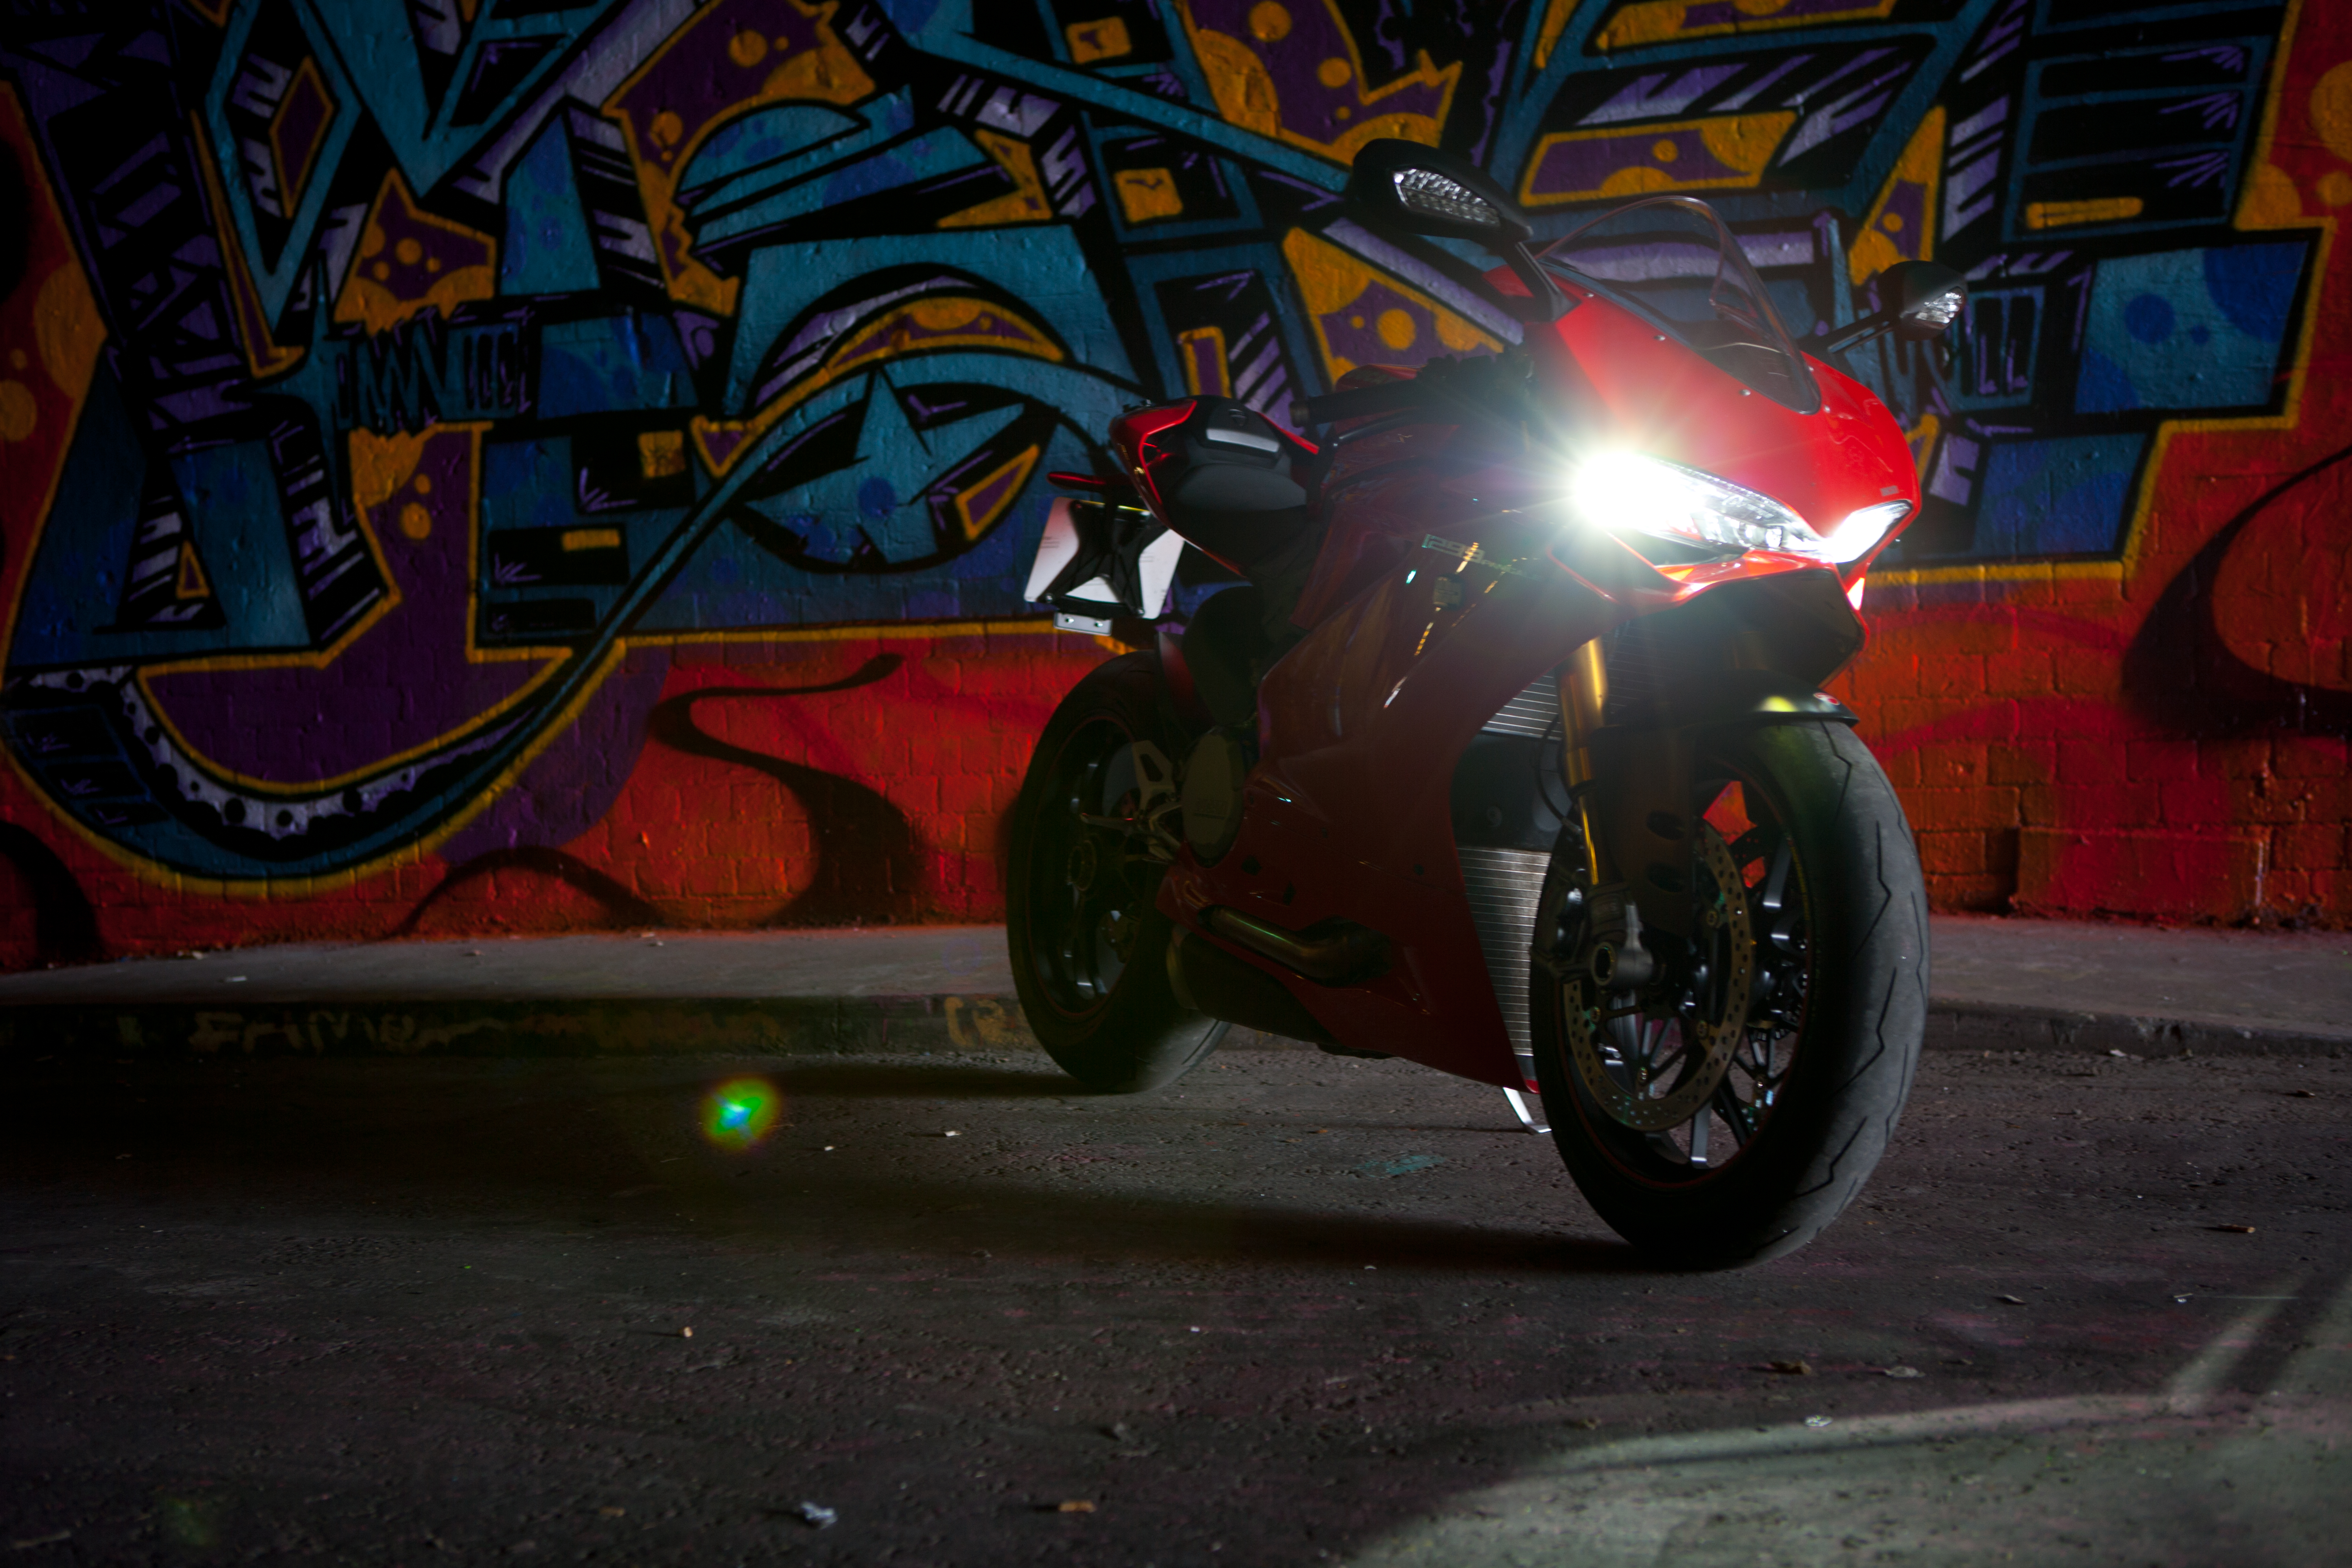 1299 Panigale S review